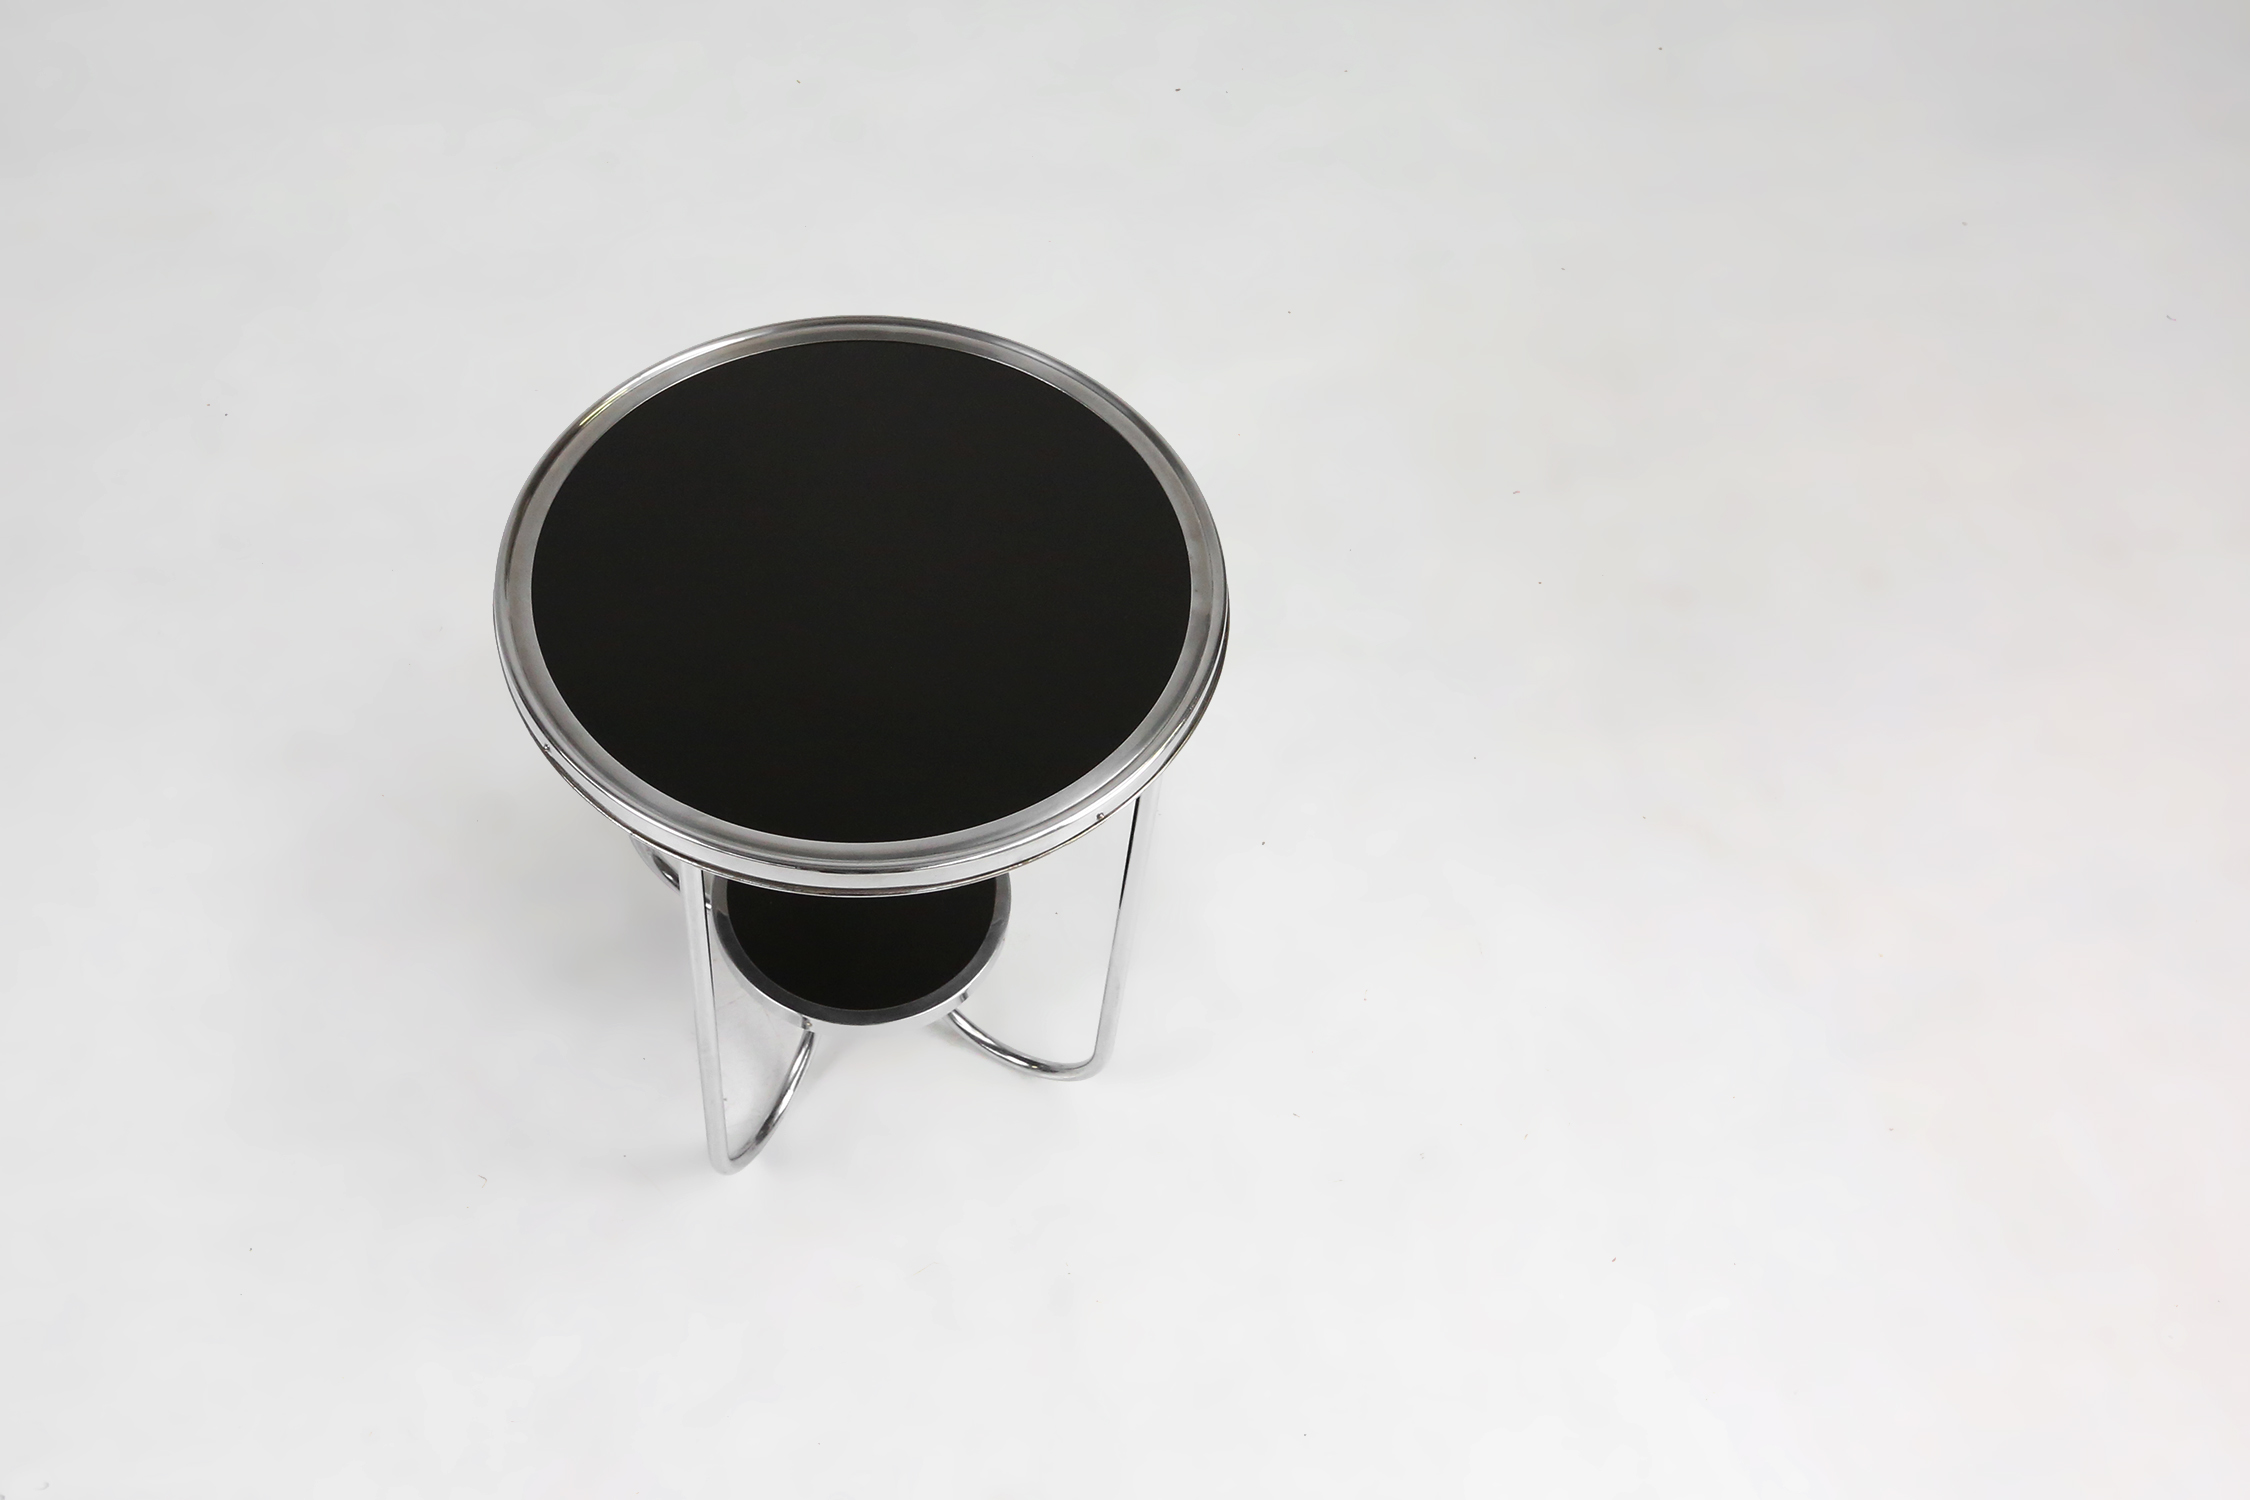 Bauhaus side table with chrome and black lacquered wood, Germany, 1930sthumbnail